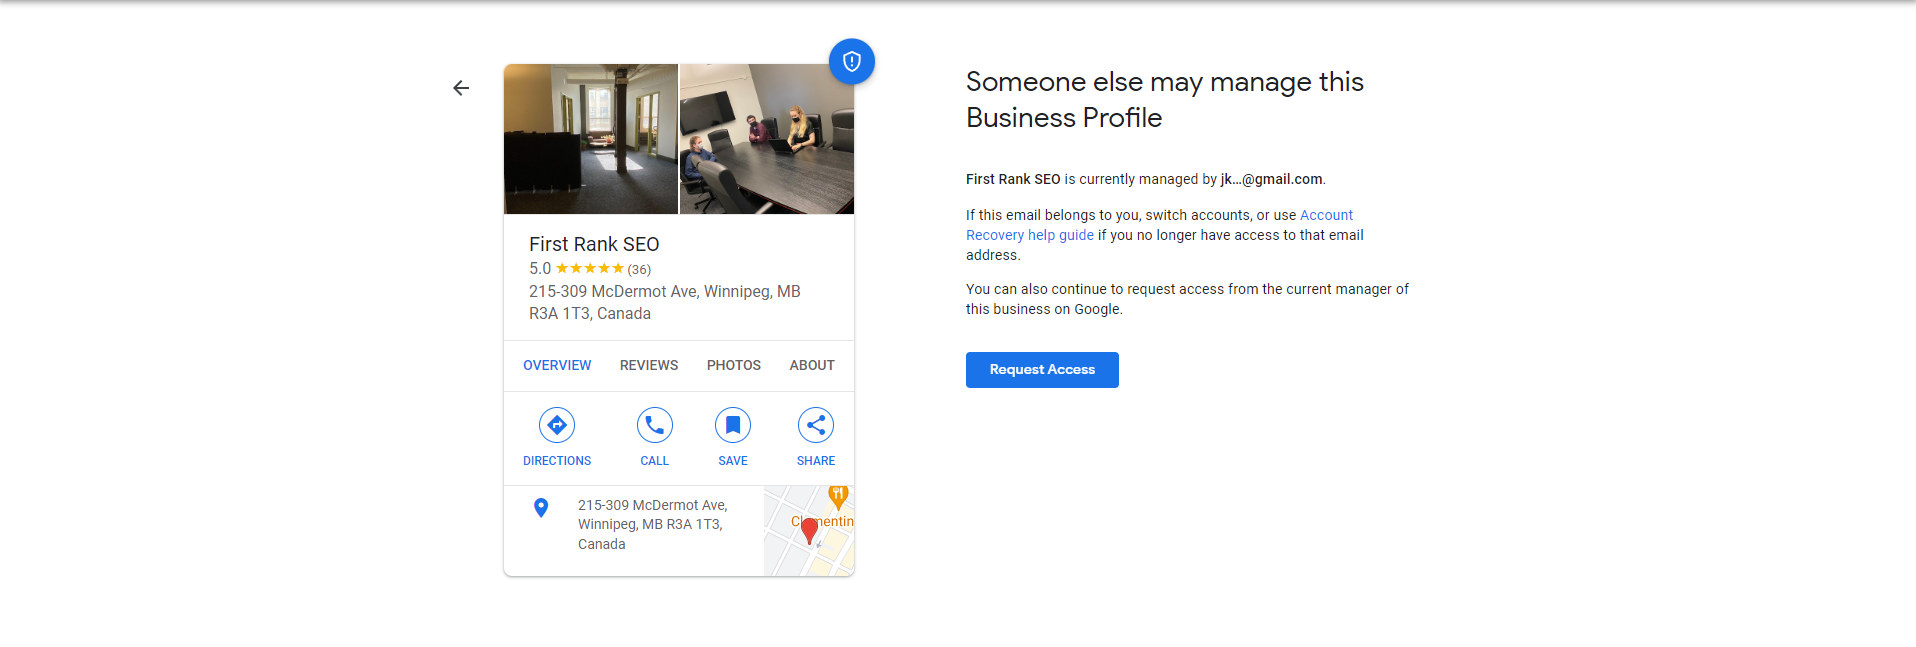 How To Claim & Verify Your Business Profile On Google